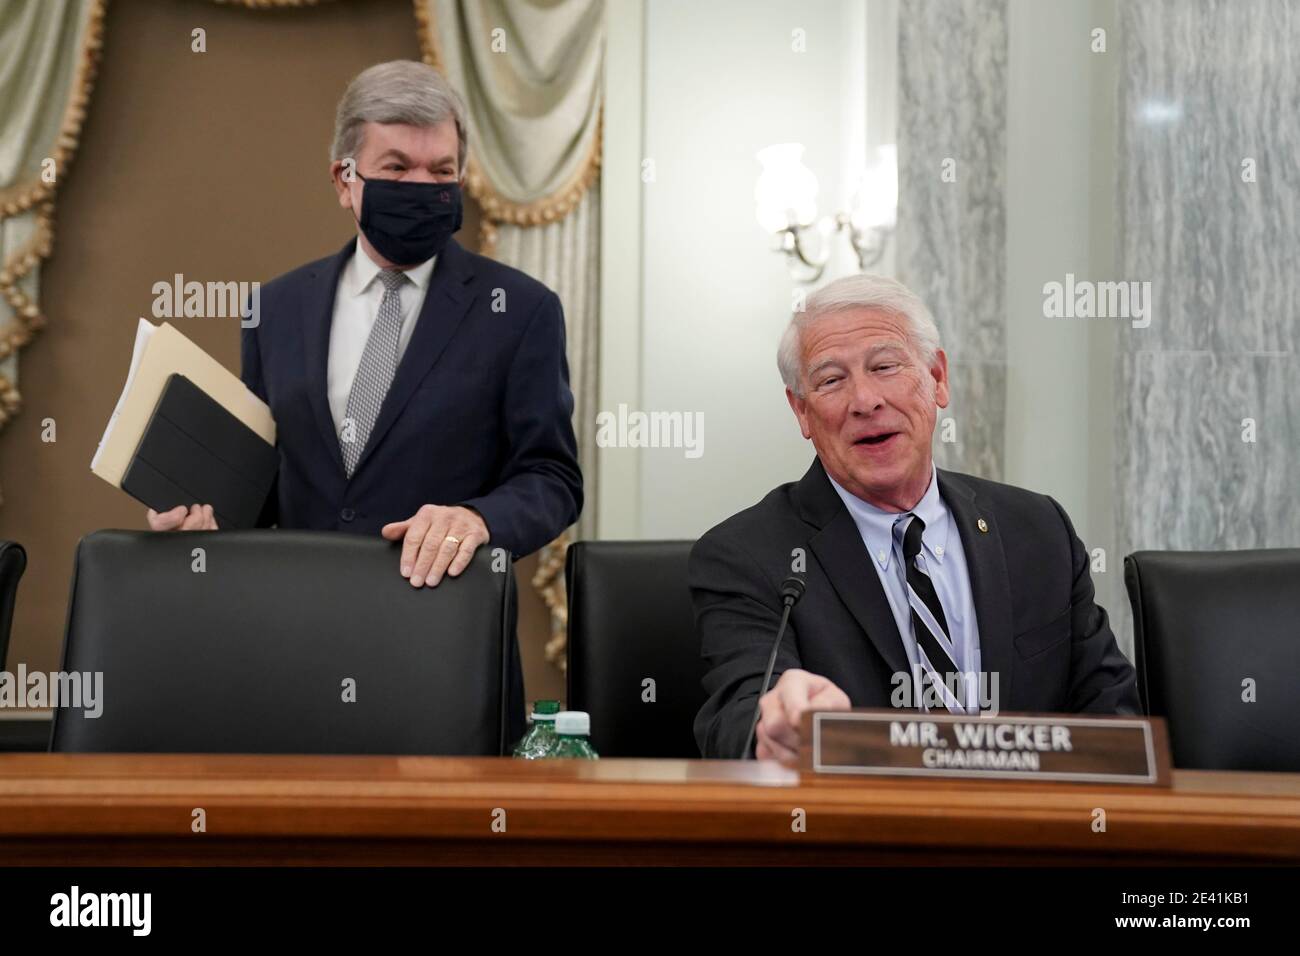 United States Senator Roger Wicker (Republican of Mississippi), Chairman, US Senate Committee on Commerce, Science, & Transportation, right, and Senator Roy Blunt, a Republican from Missouri, arrive to a confirmation hearing for U.S. Secretary of Transportation nominee Pete Buttigieg in Washington, DC, U.S., on Thursday, Jan. 21, 2021. Buttigieg, is pledging to carry out the administration's ambitious agenda to rebuild the nation's infrastructure, calling it a 'generational opportunity' to create new jobs, fight economic inequality and stem climate change. Credit: Stefani Reynolds/Pool via Stock Photo